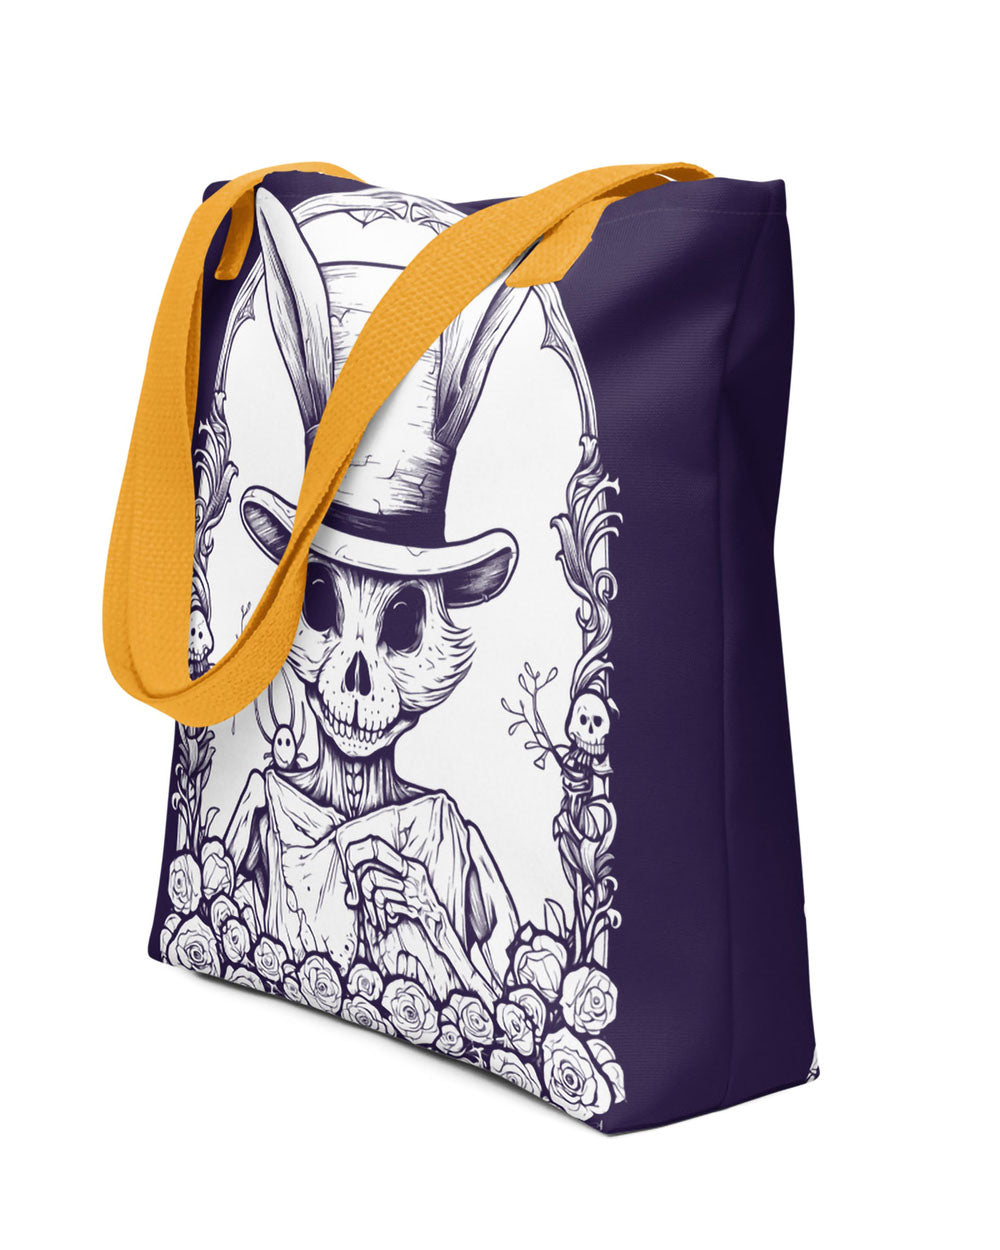 Crystal Queen Vegan Tote Bag - Witchy Goth Large Foldable & Reusable B –  Rogue + Wolf